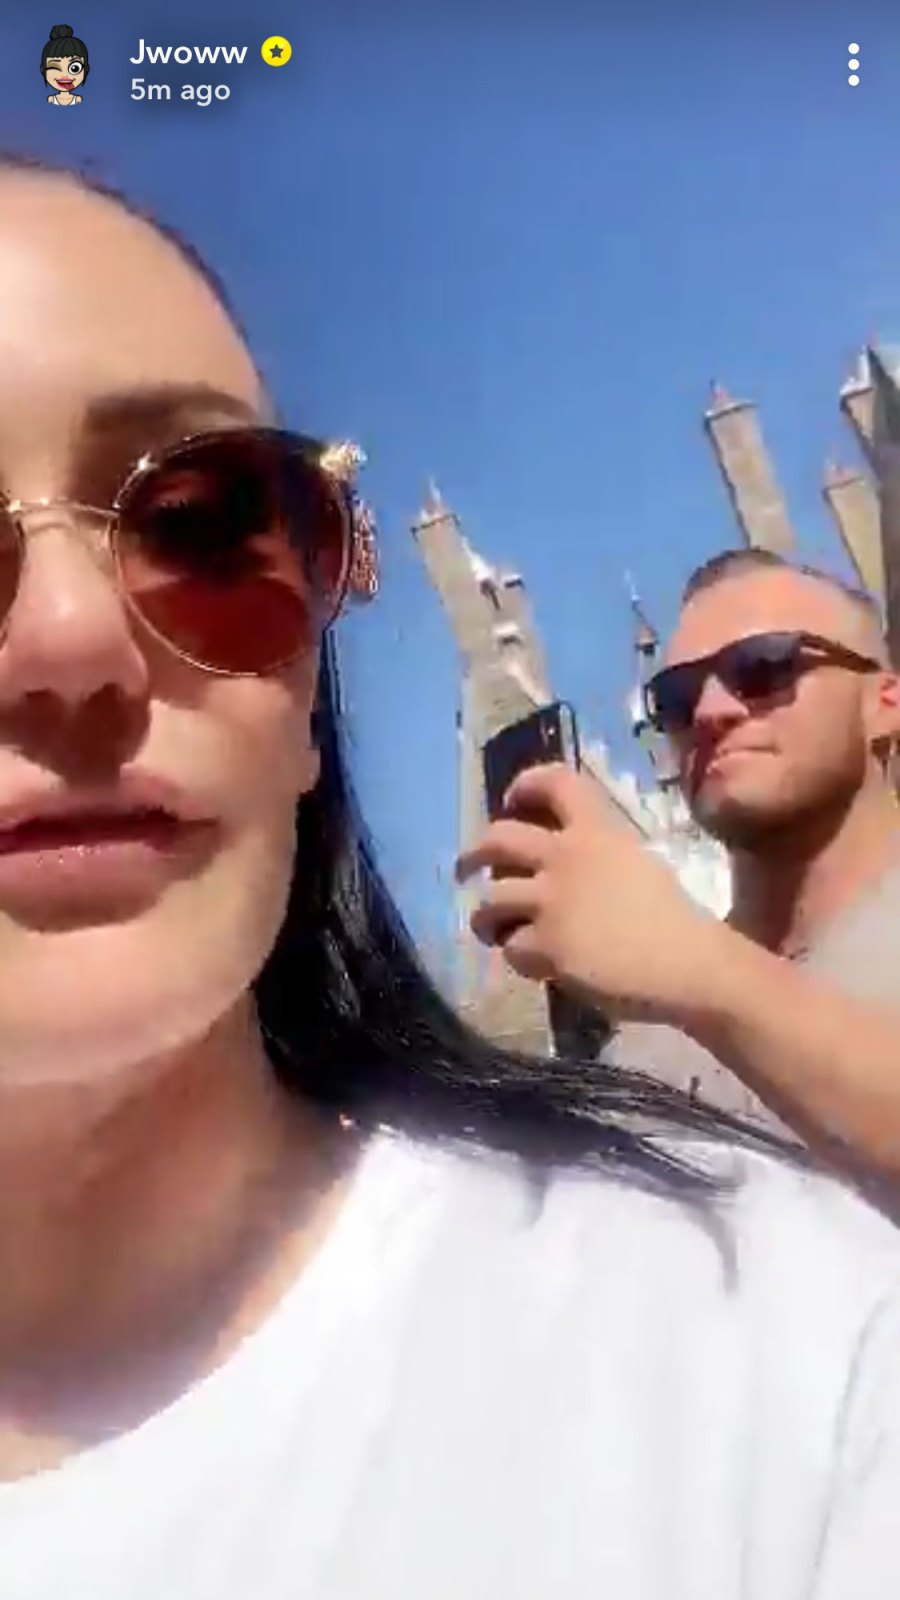 JWoww’s ‘Jersey Shore’ Pals Show Support for Her New Boyfriend As They Visit Harry Potter World Instagram Diagon Alley Jwoww and Zack Clayton Carpinello